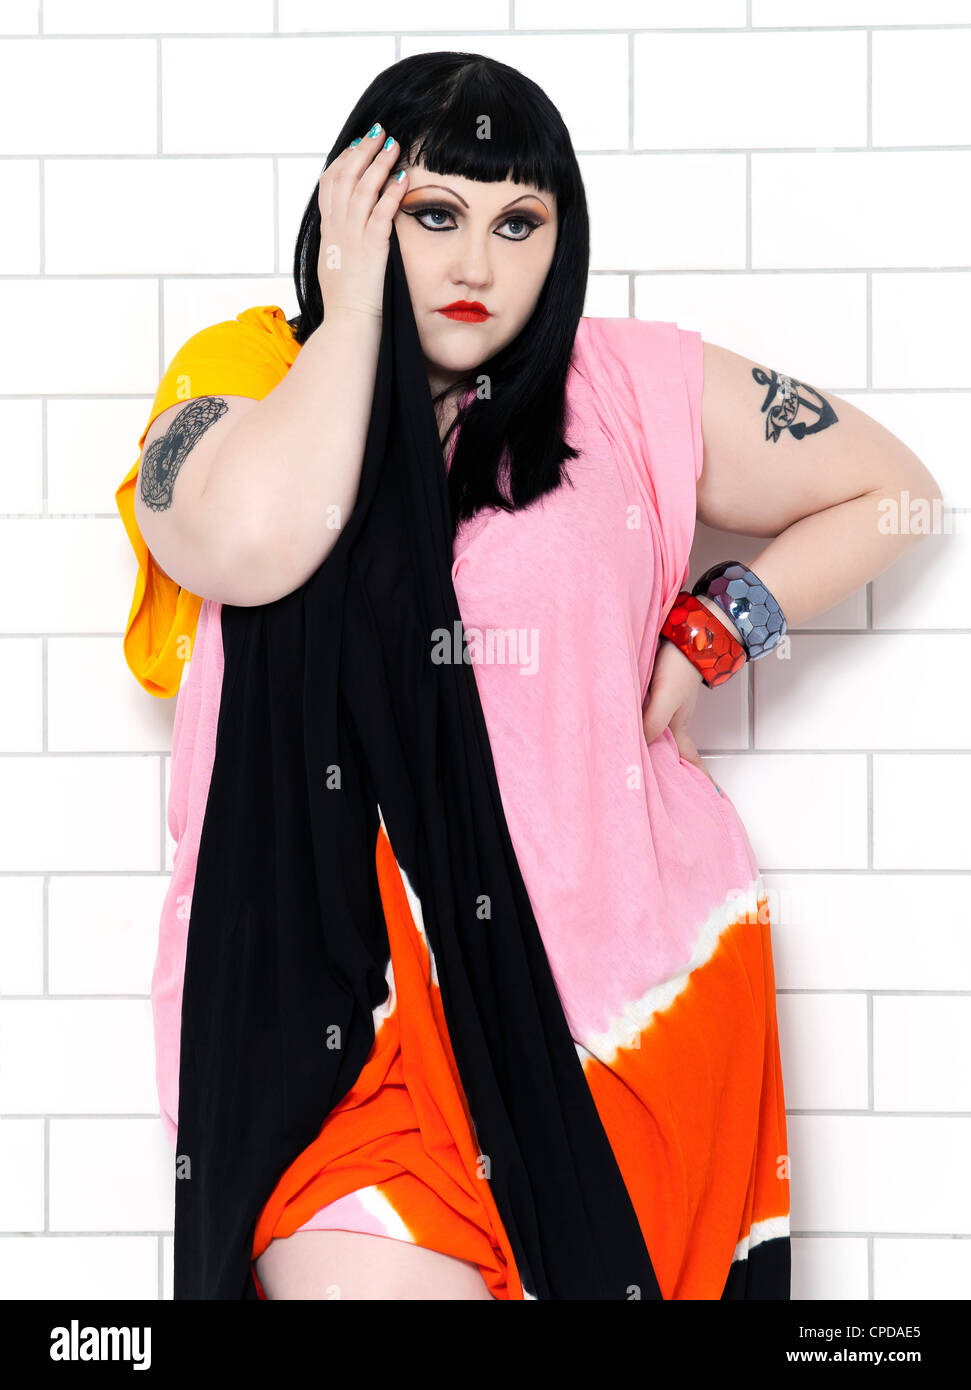 London, UK - January 31, 2012: beth ditto portrait of the pop group gossip in a bathroom at London, UK on january 31th, 2012 Stock Photo